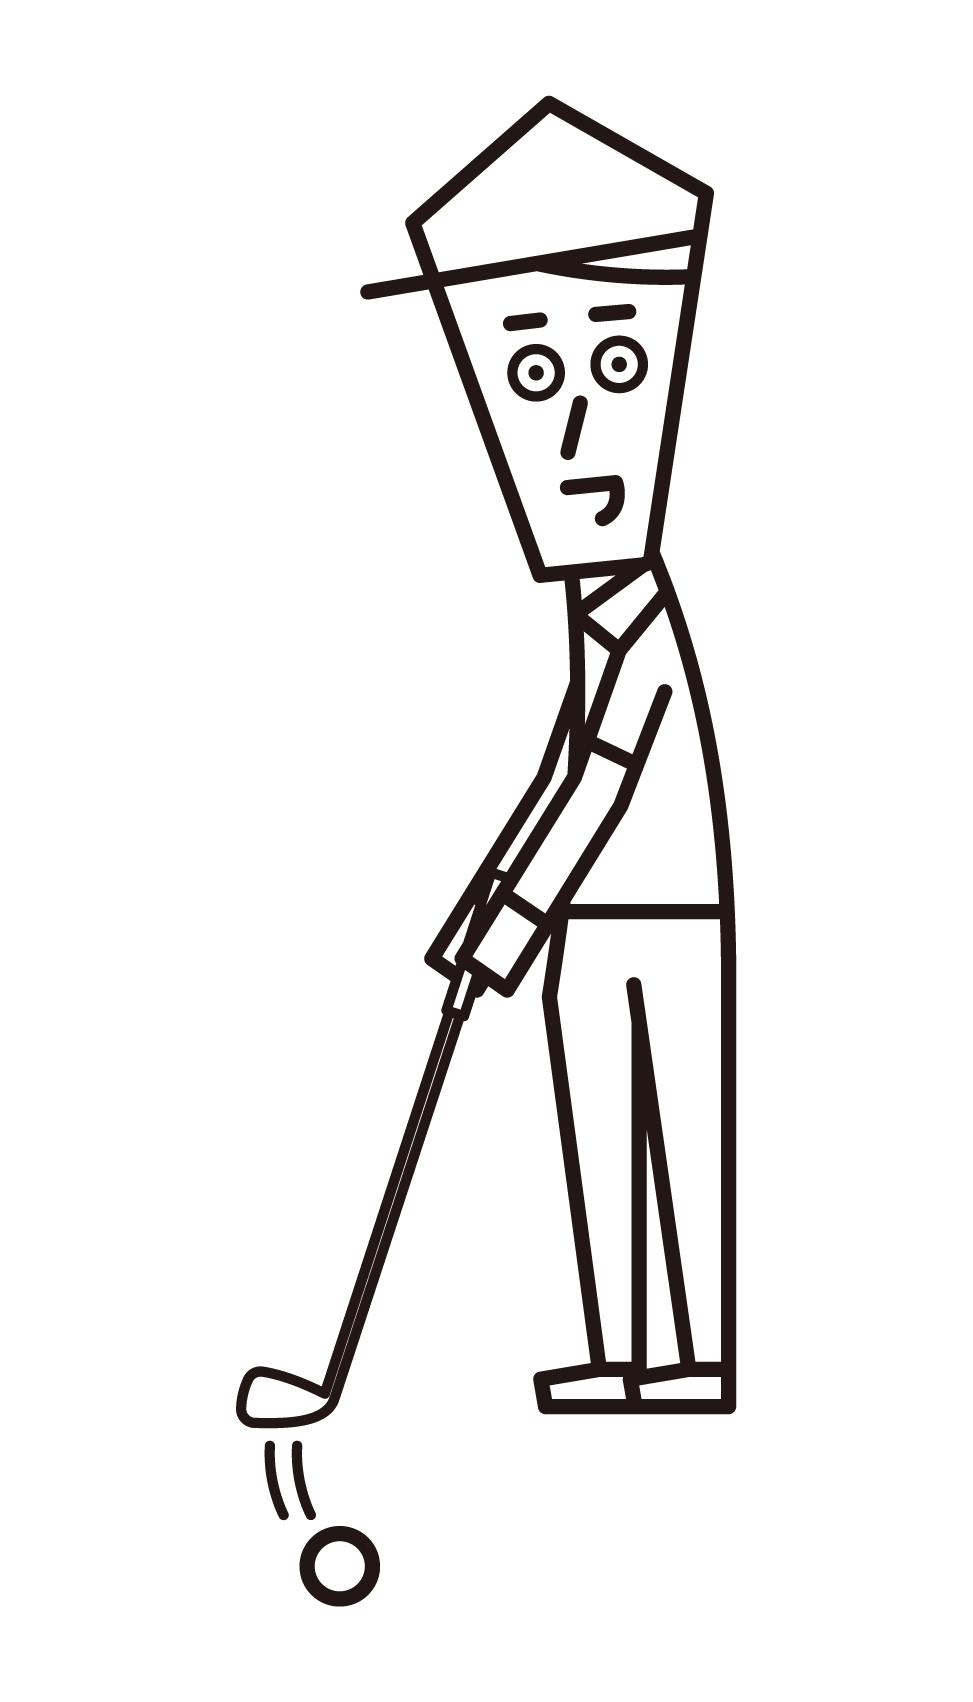 Illustration of a man who hits a putter in golf